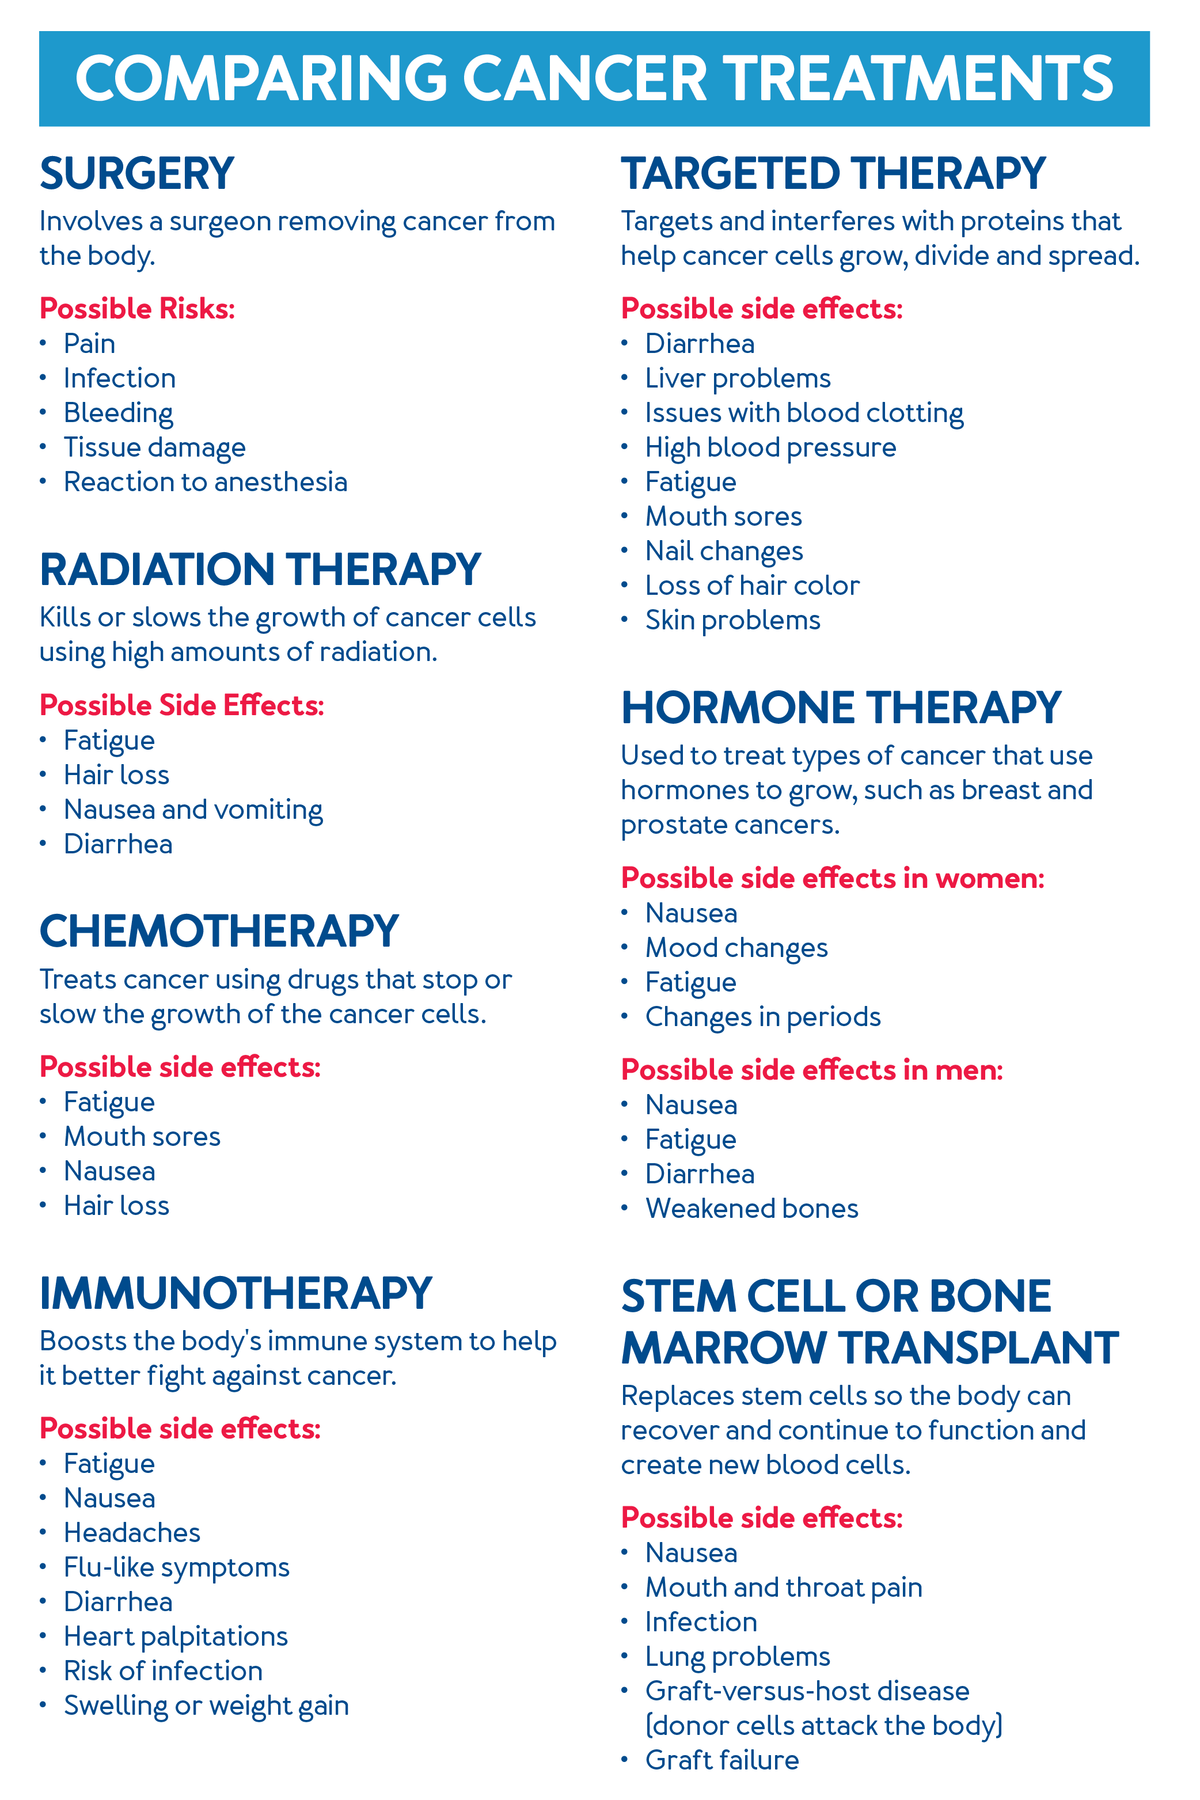 Comparing Cancer Treatments, Further details are provided below.